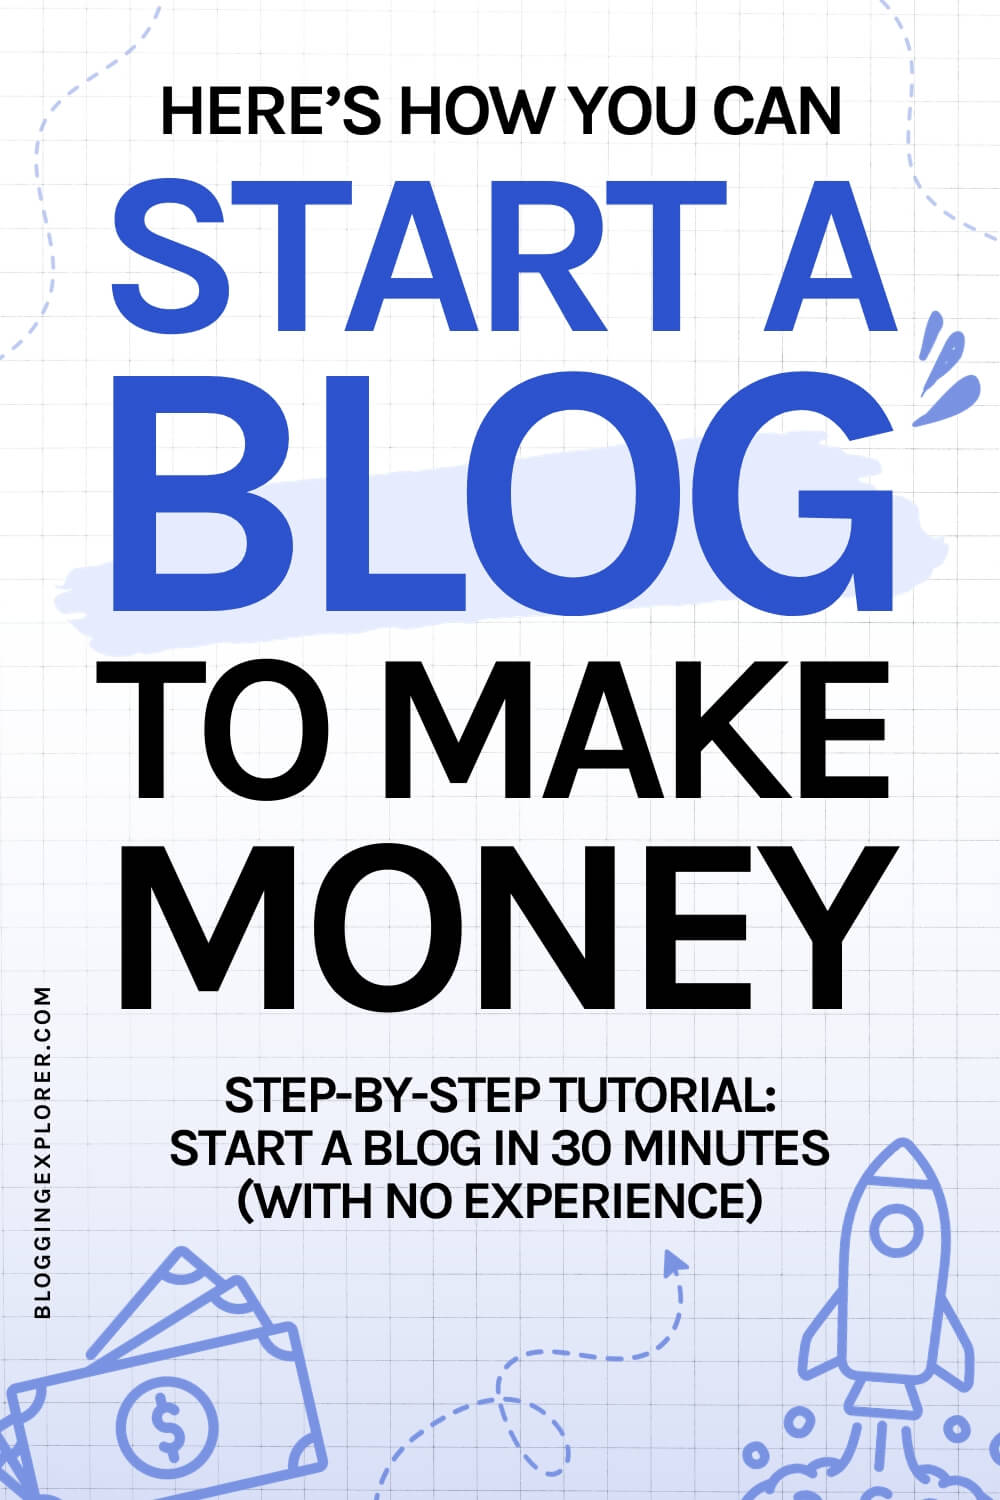 How you can start a blog to make money – Step-by-step tutorial to start a blog with no experience